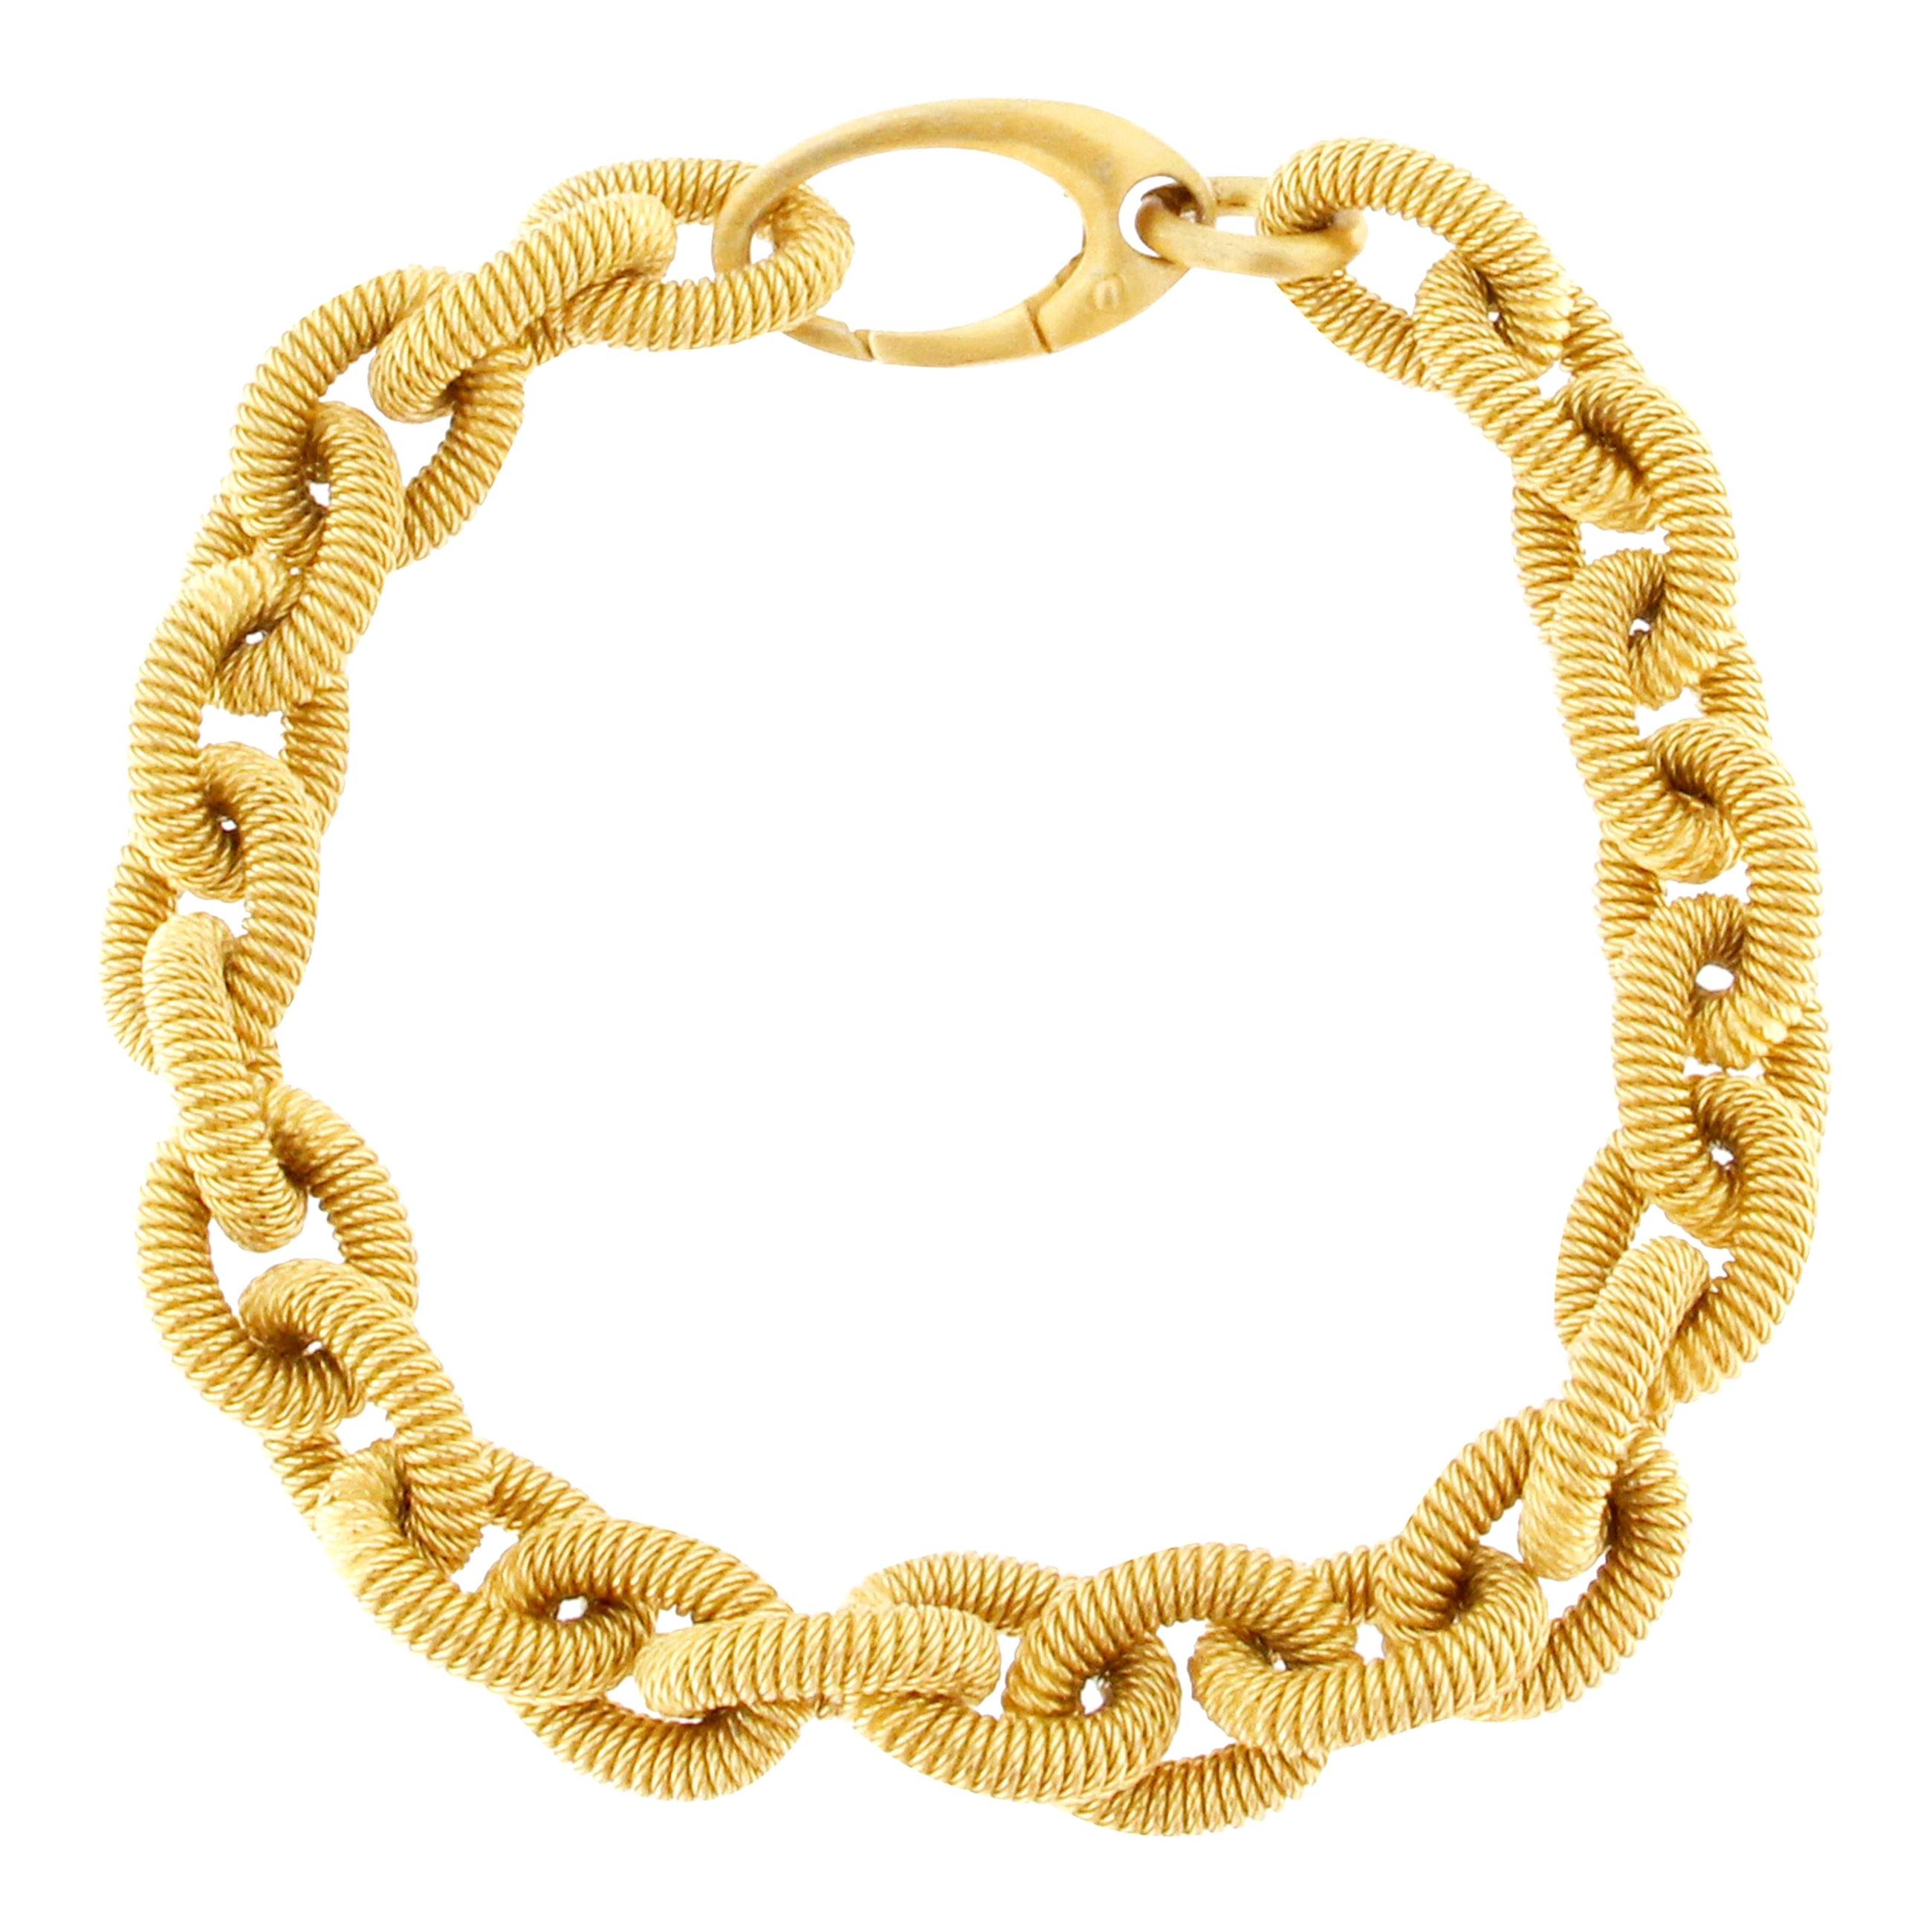 Alex Jona Gold-Plated Sterling Silver Twisted Wire Link Chain Bracelet